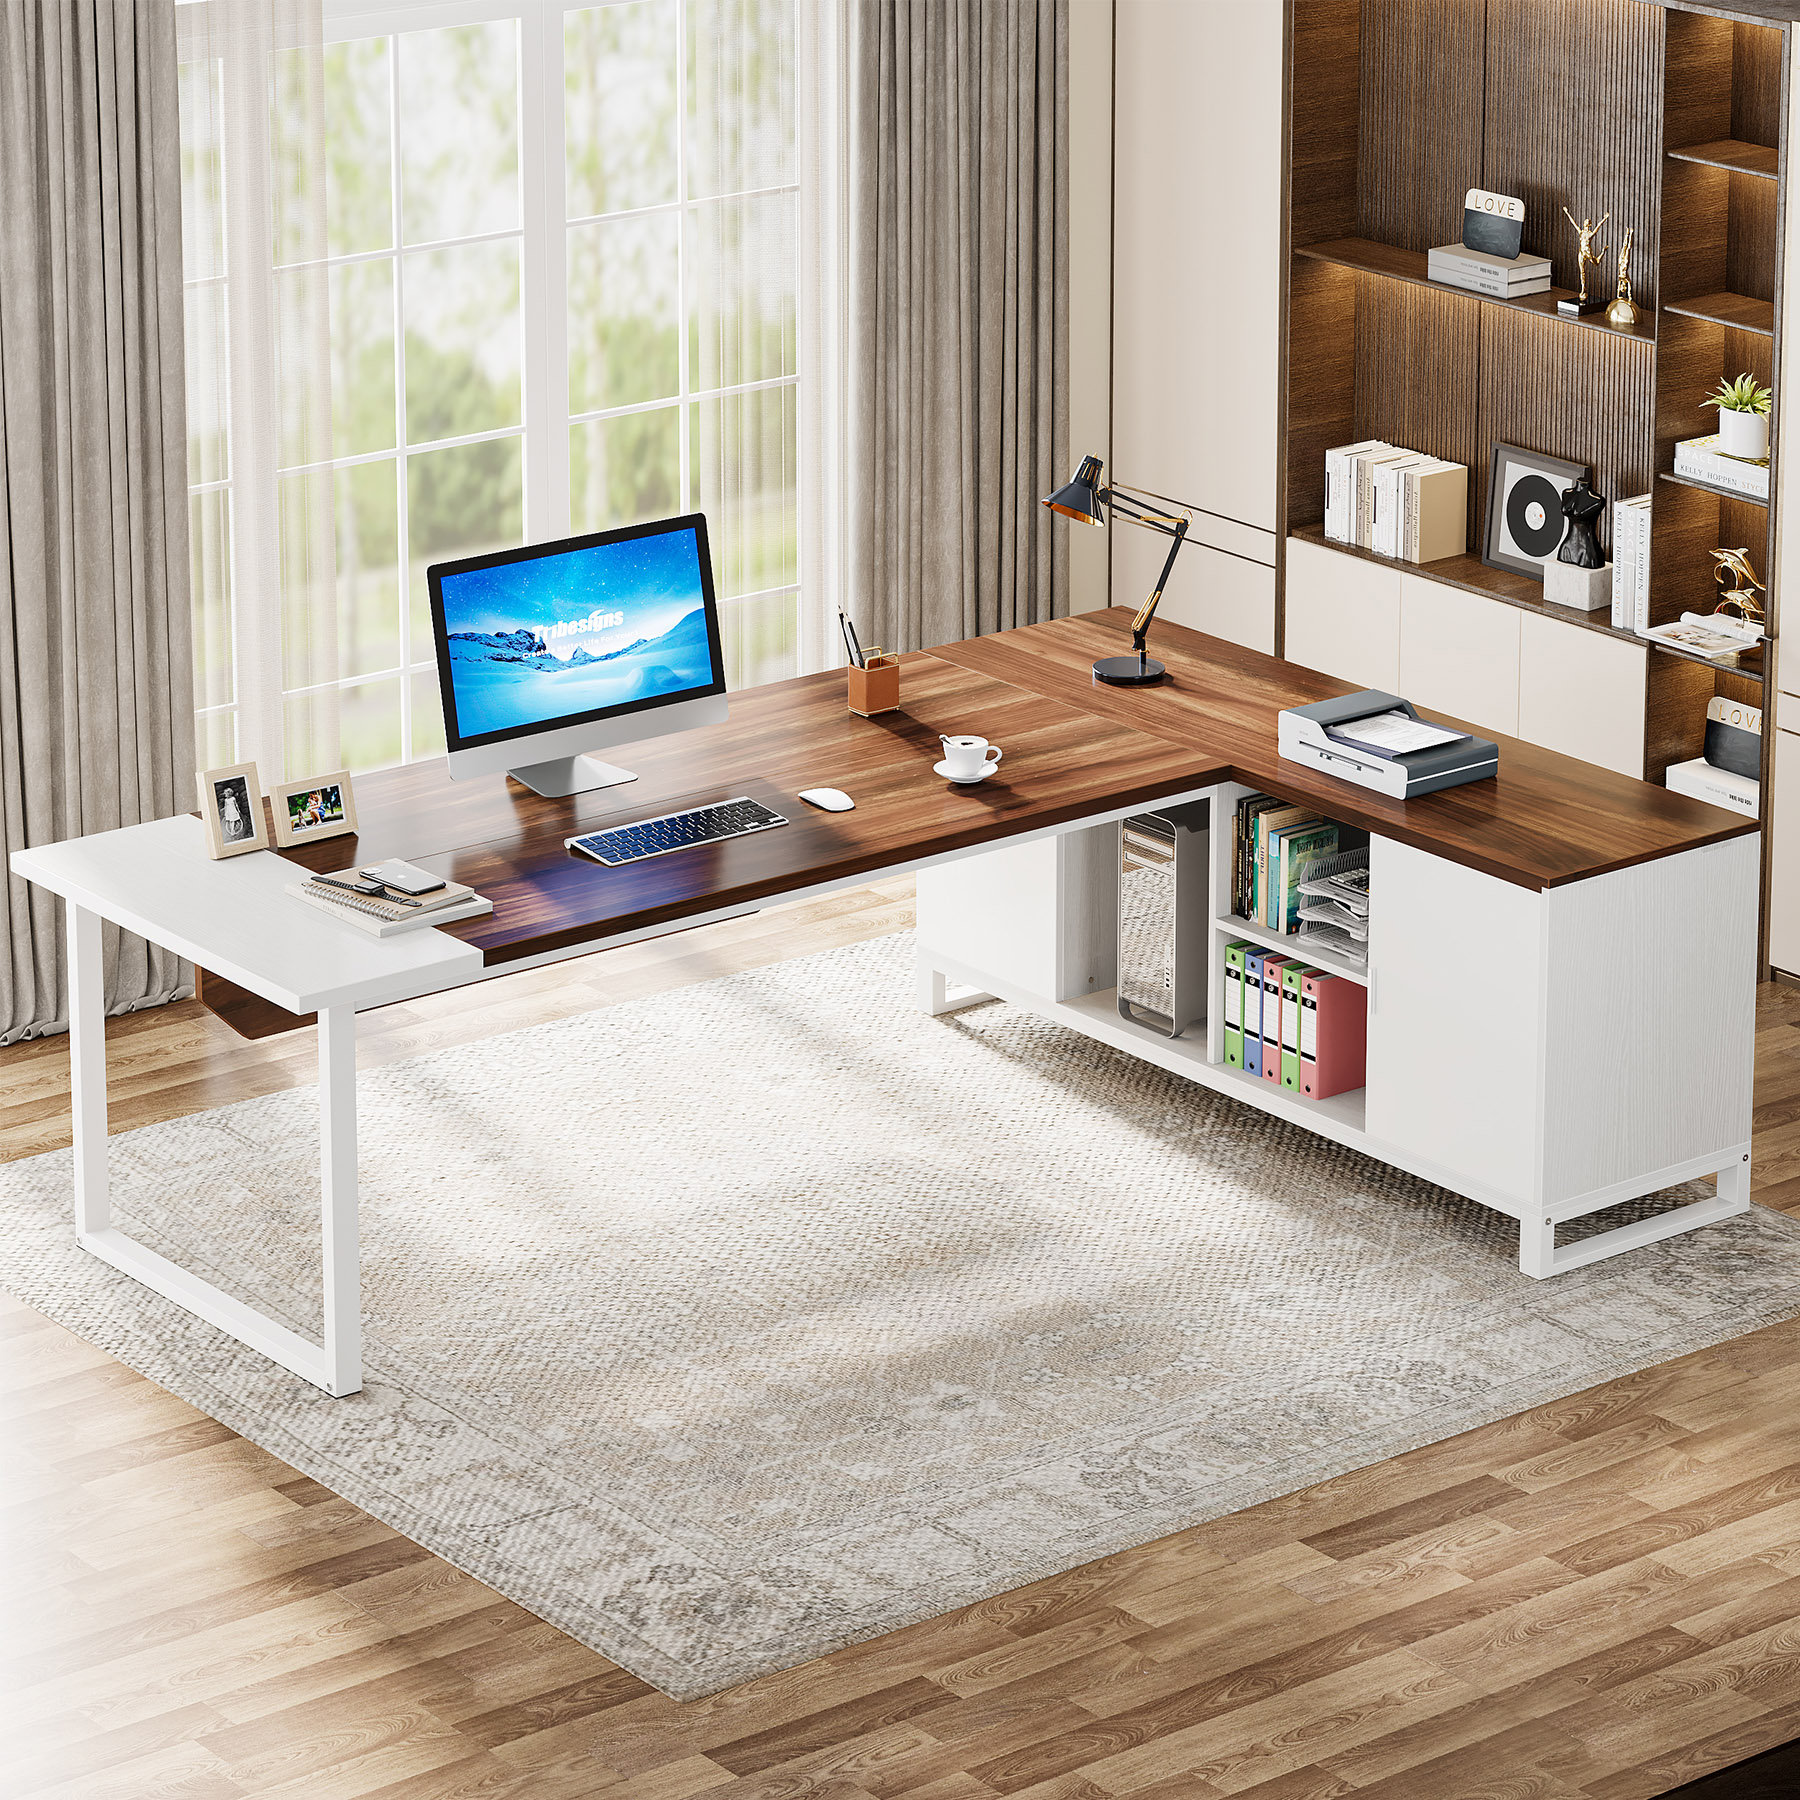 Free Shipping on Chicent L-shaped Modern Executive Desk with Ample